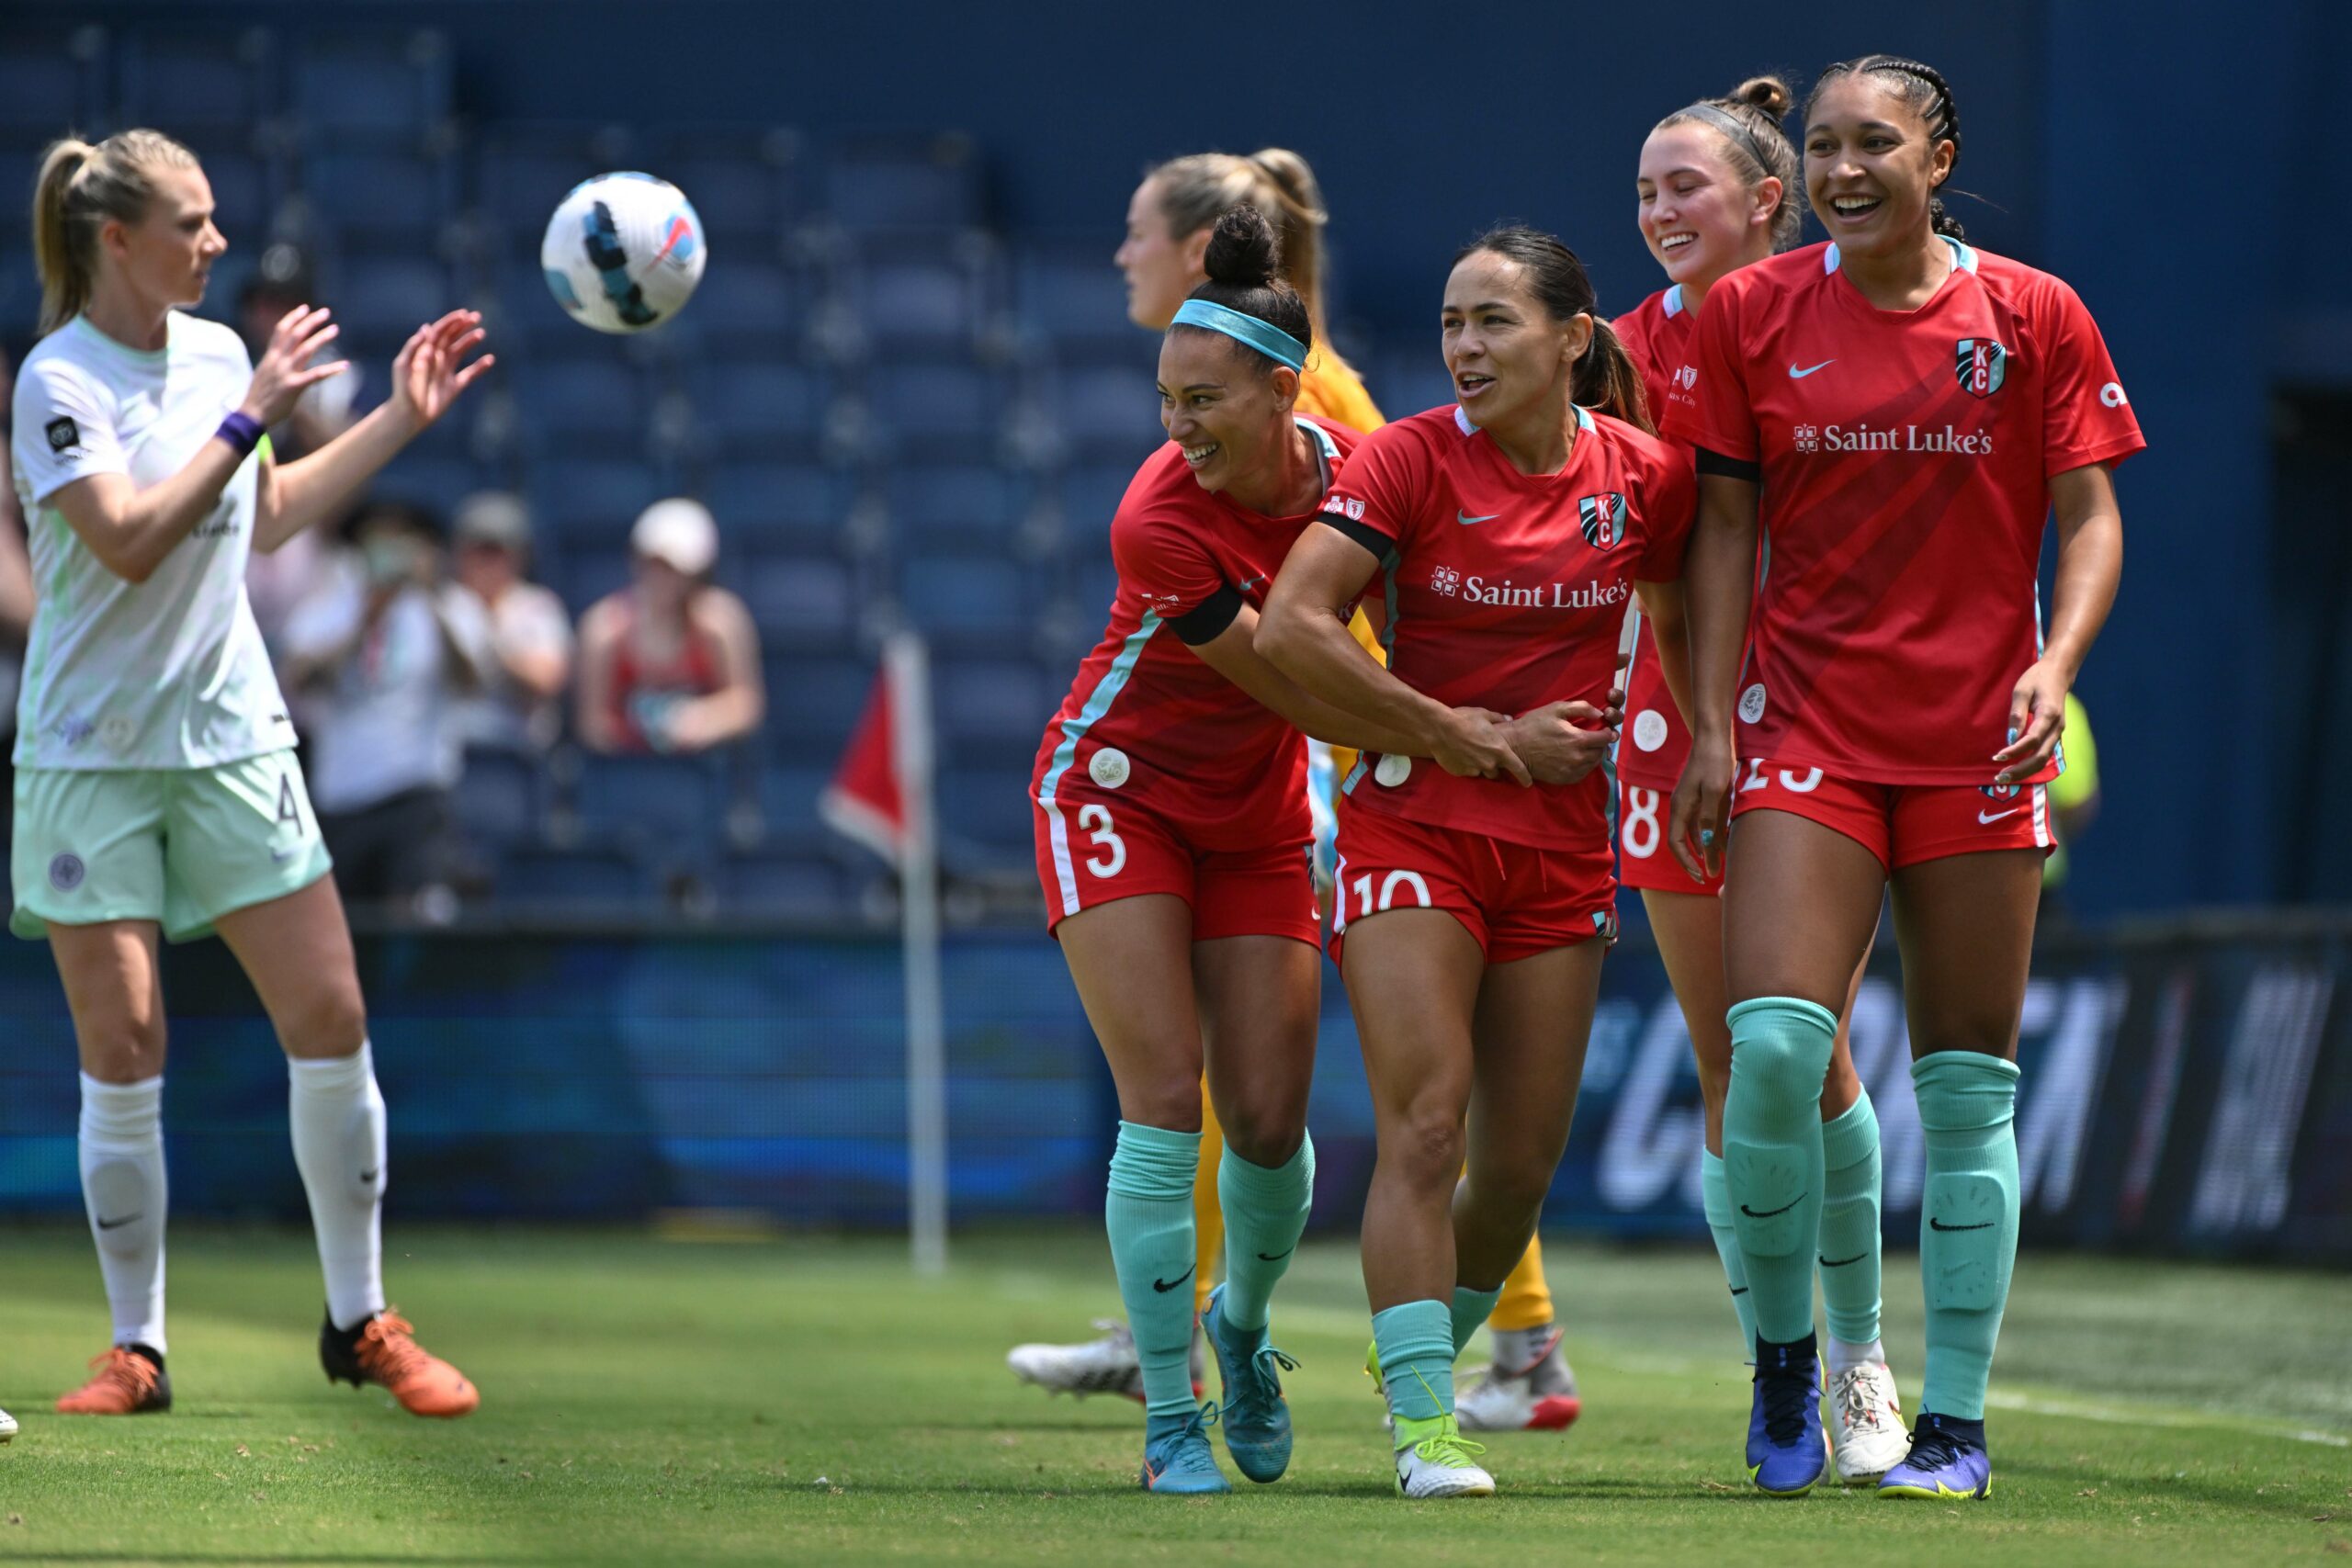 13-facts-about-kansas-city-nwsl